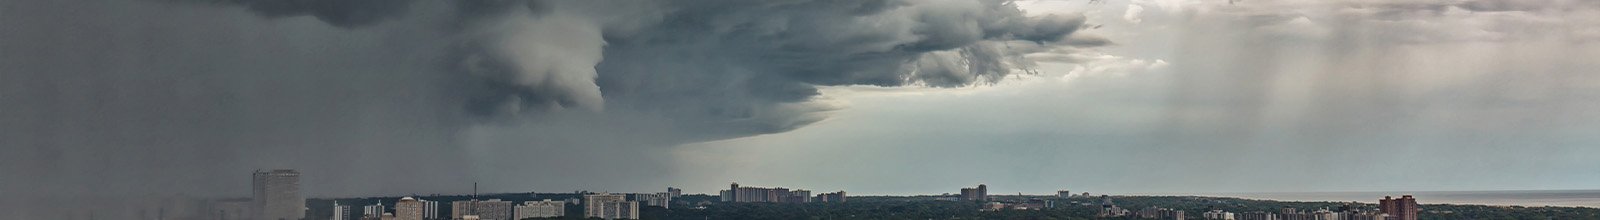 Clouds with Funnel cloud formation and downpour over east Toronto in summer sky